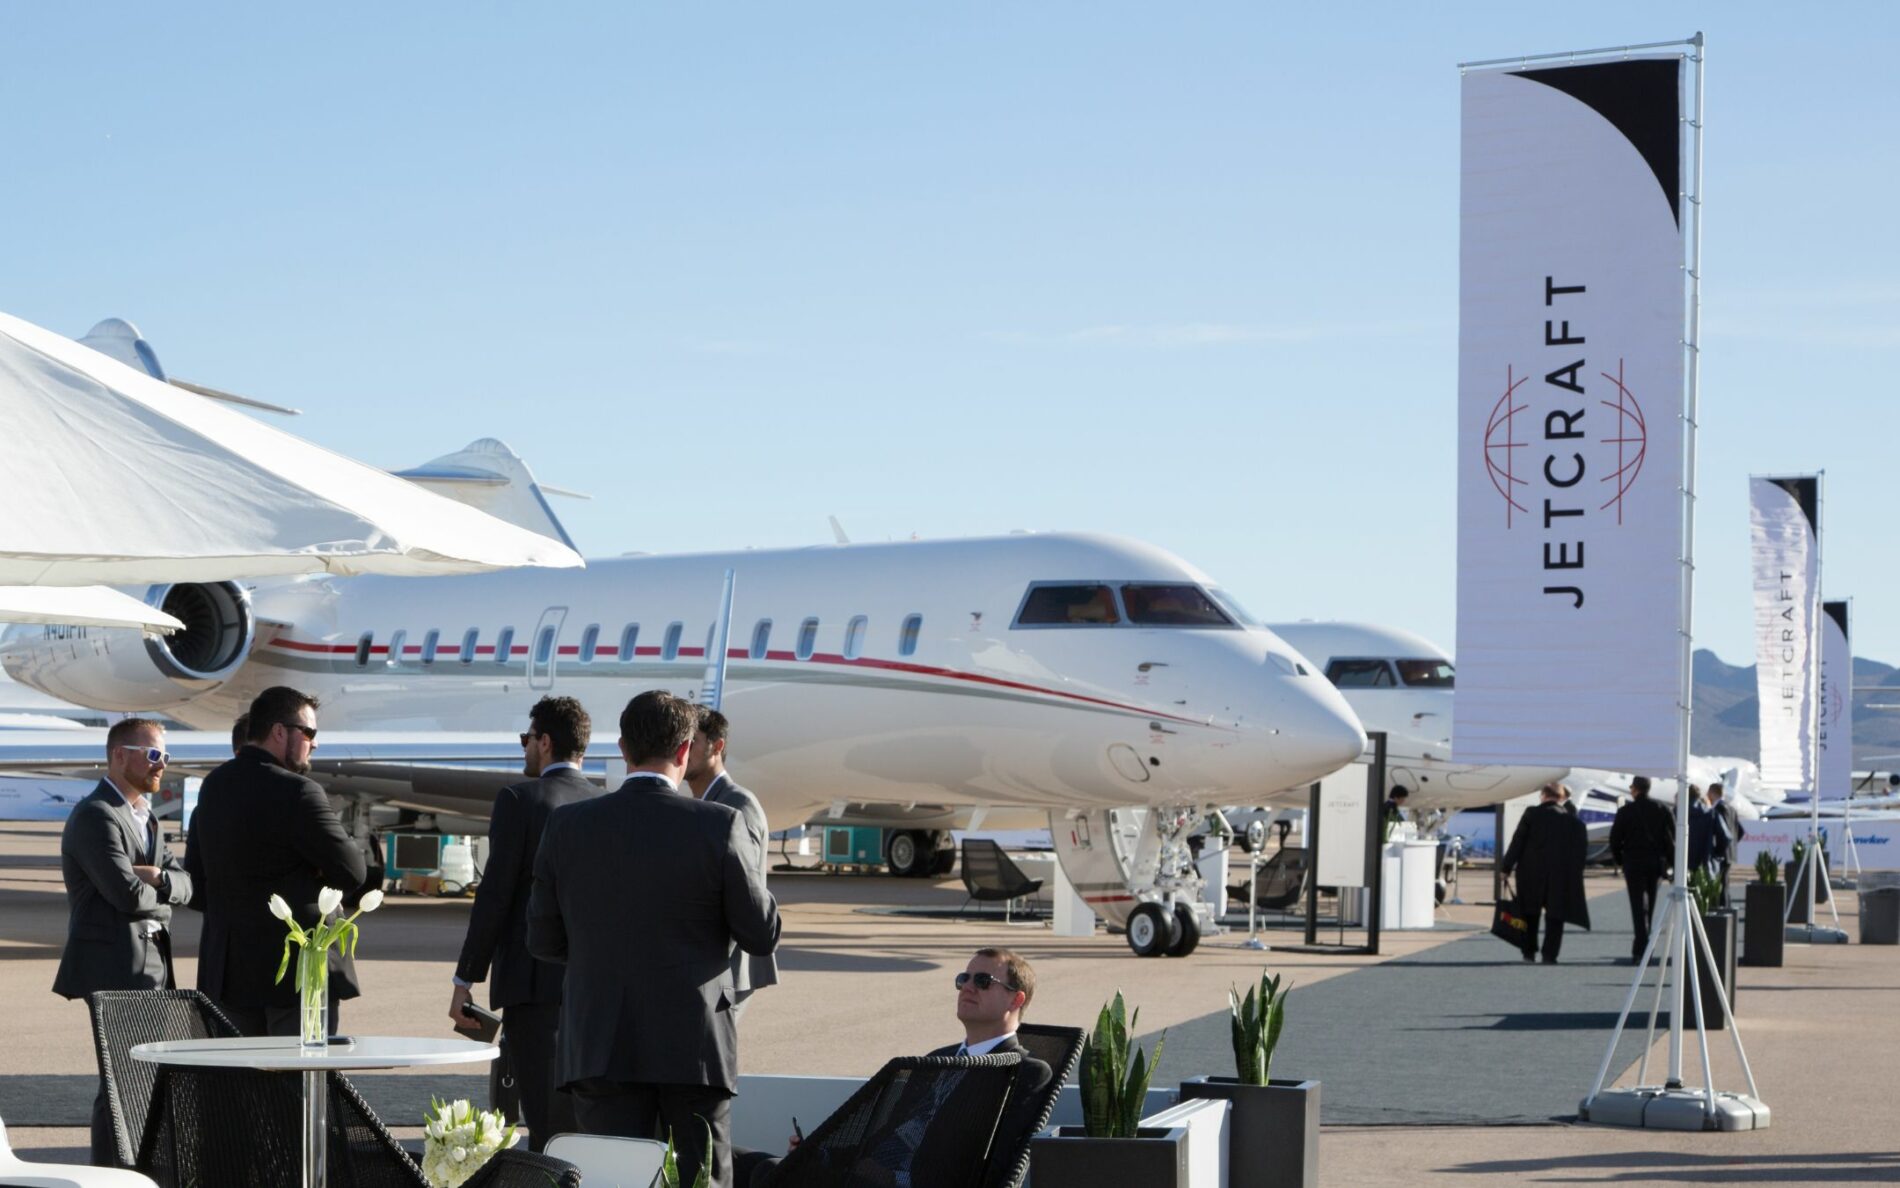 men in suits sat in front of luxury private jets on a sunny day